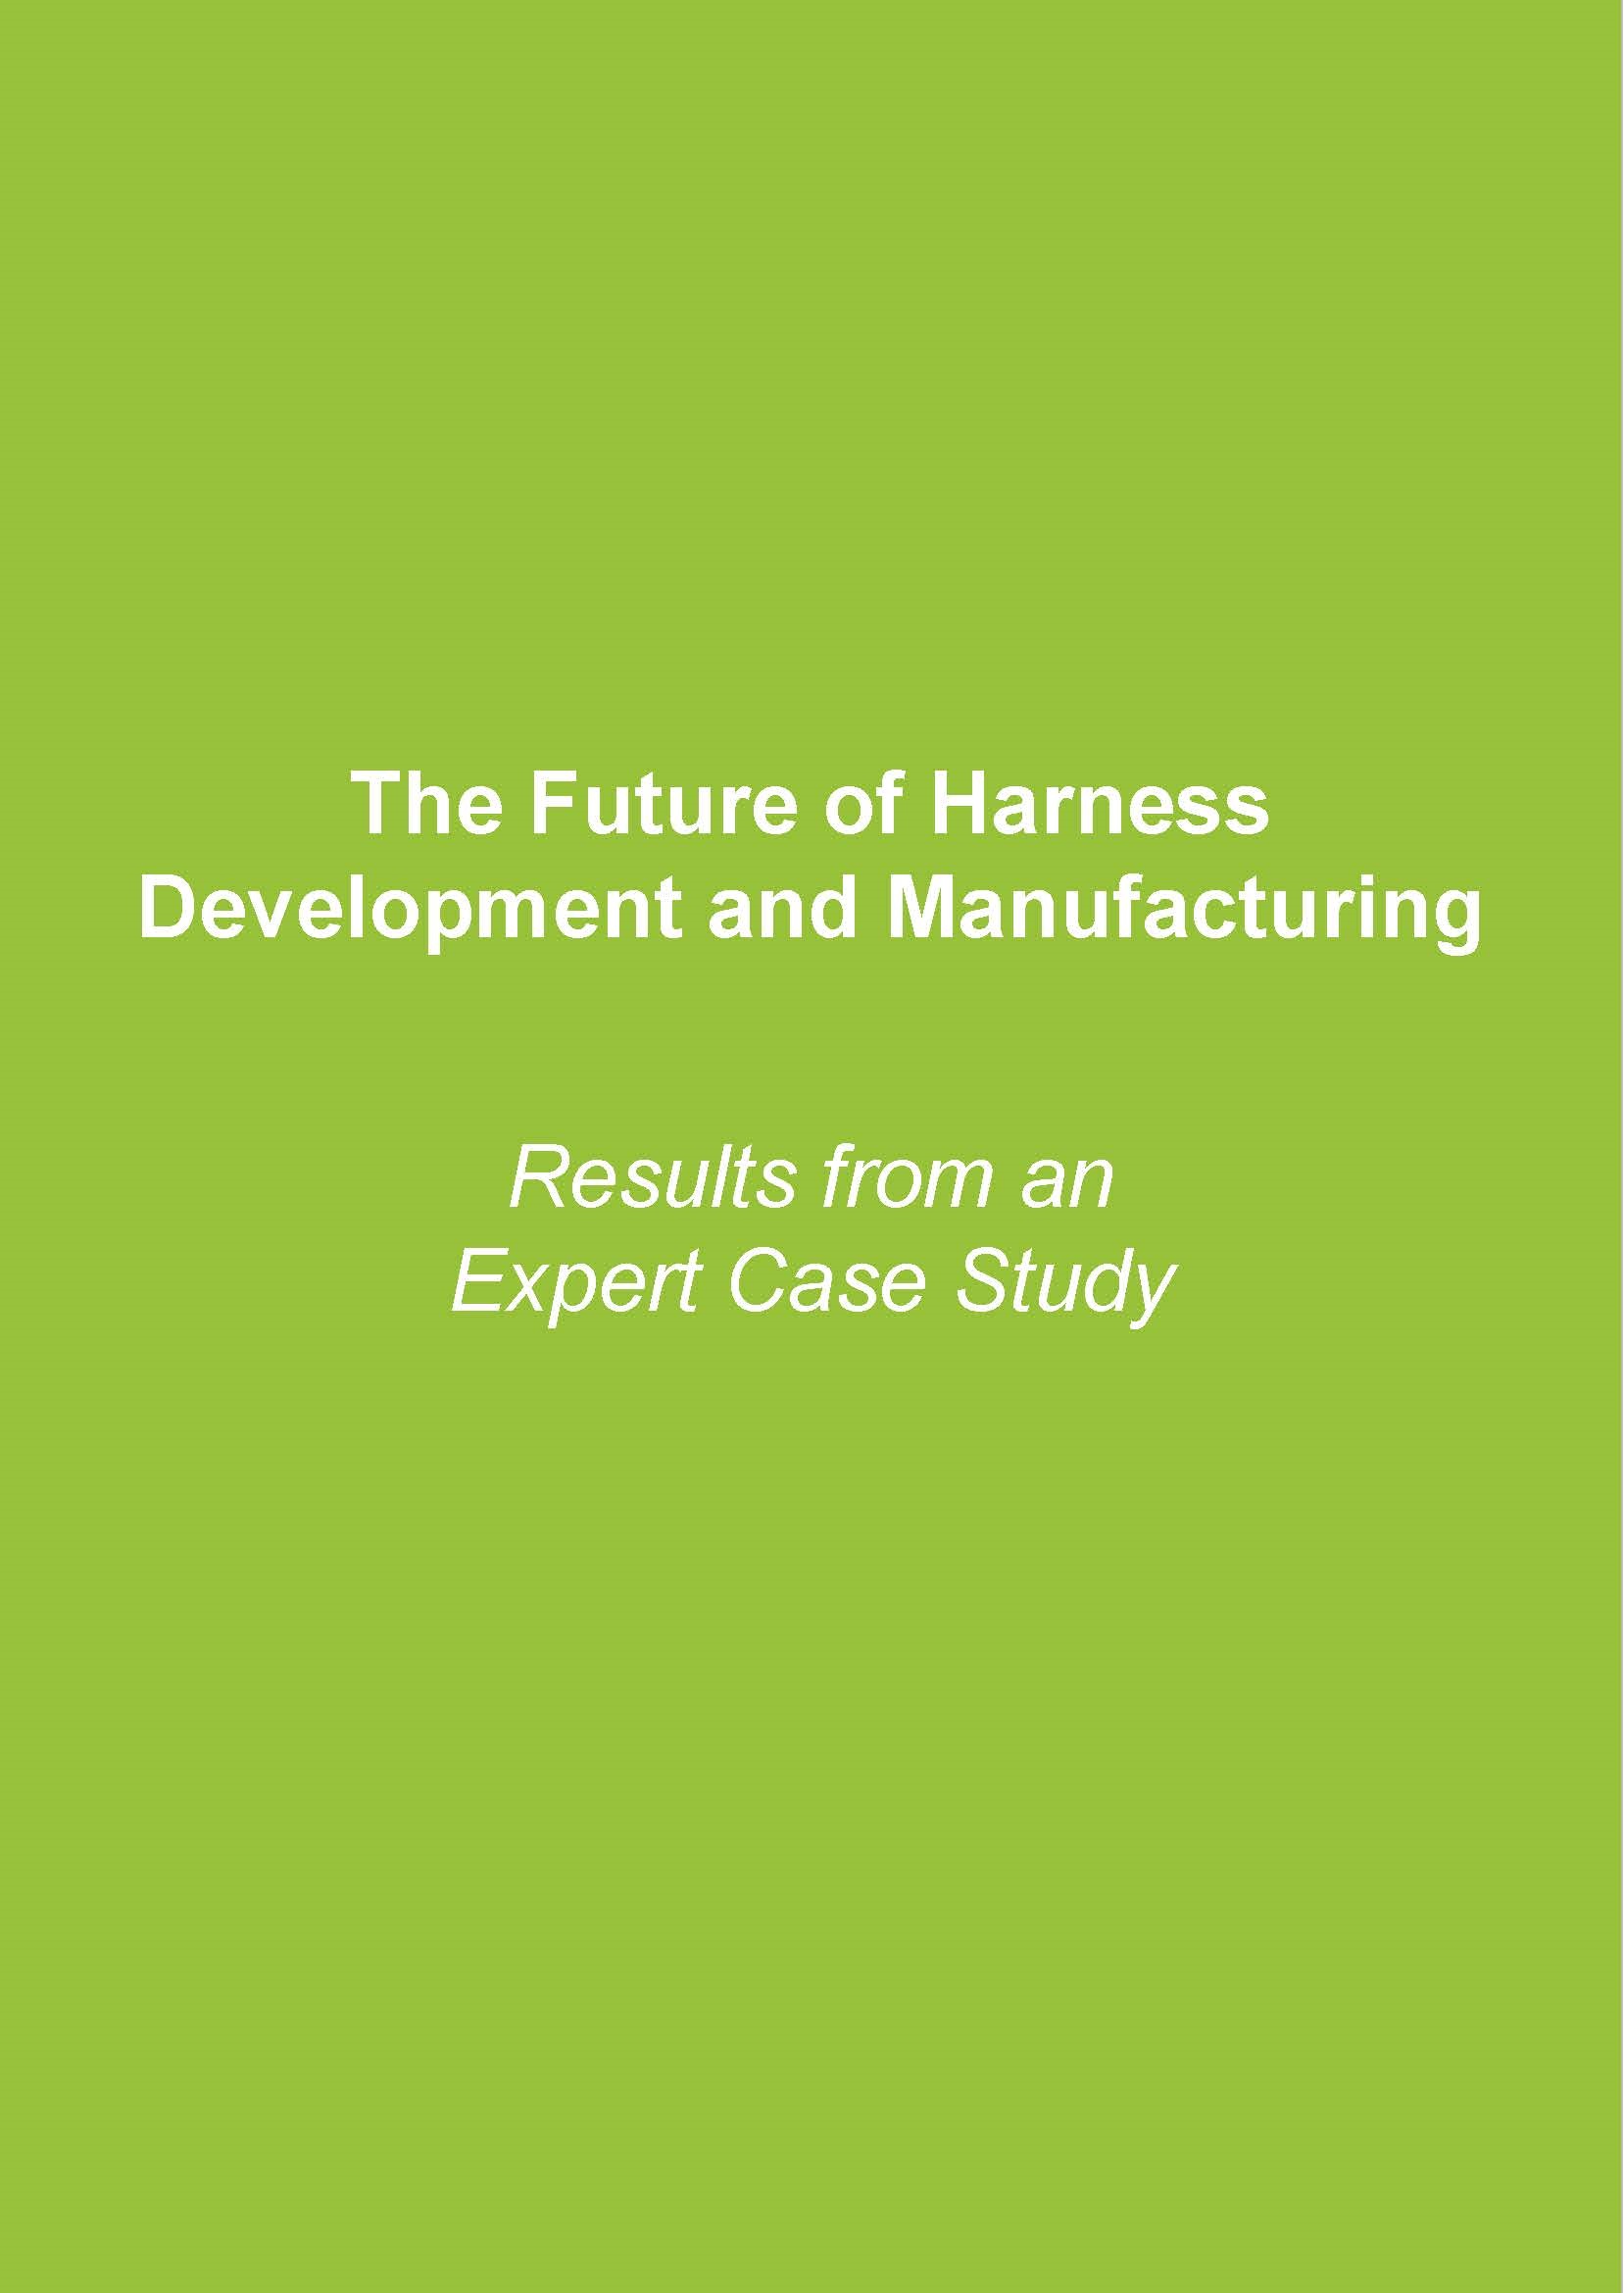 The Future of Harness Development and Manufacturing